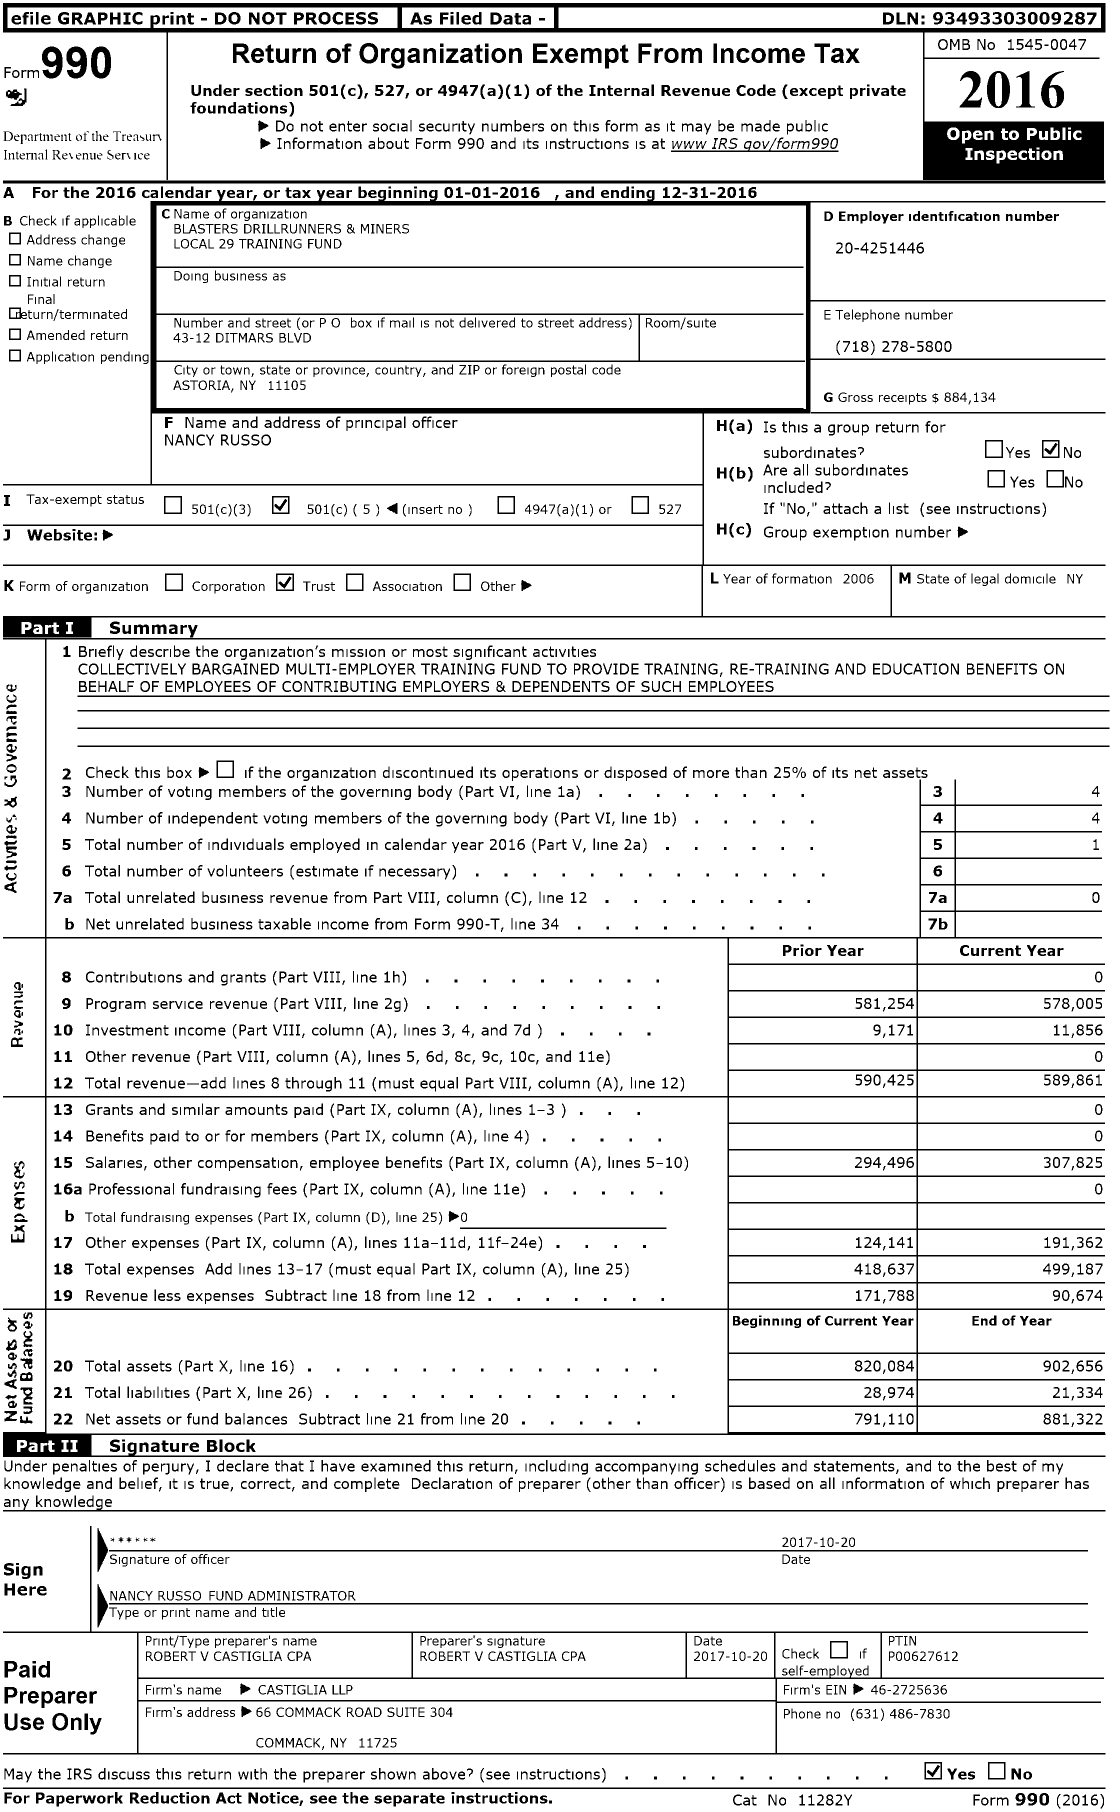 Image of first page of 2016 Form 990O for Blasters Drillrunners and Miners Local 29 Training Fund